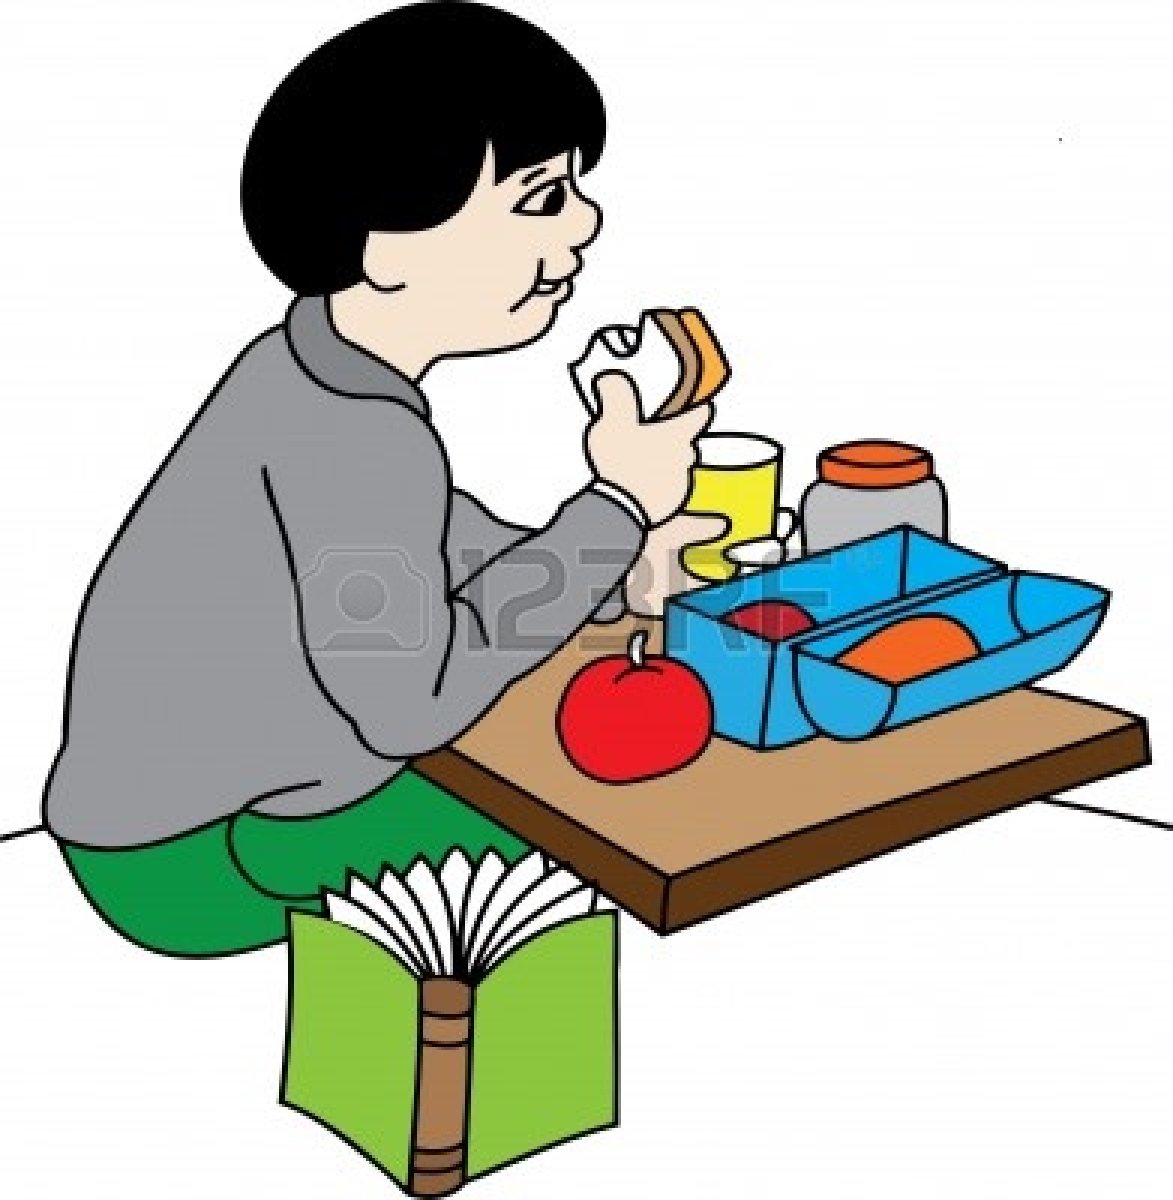 Eating Lunch At School Clip Art